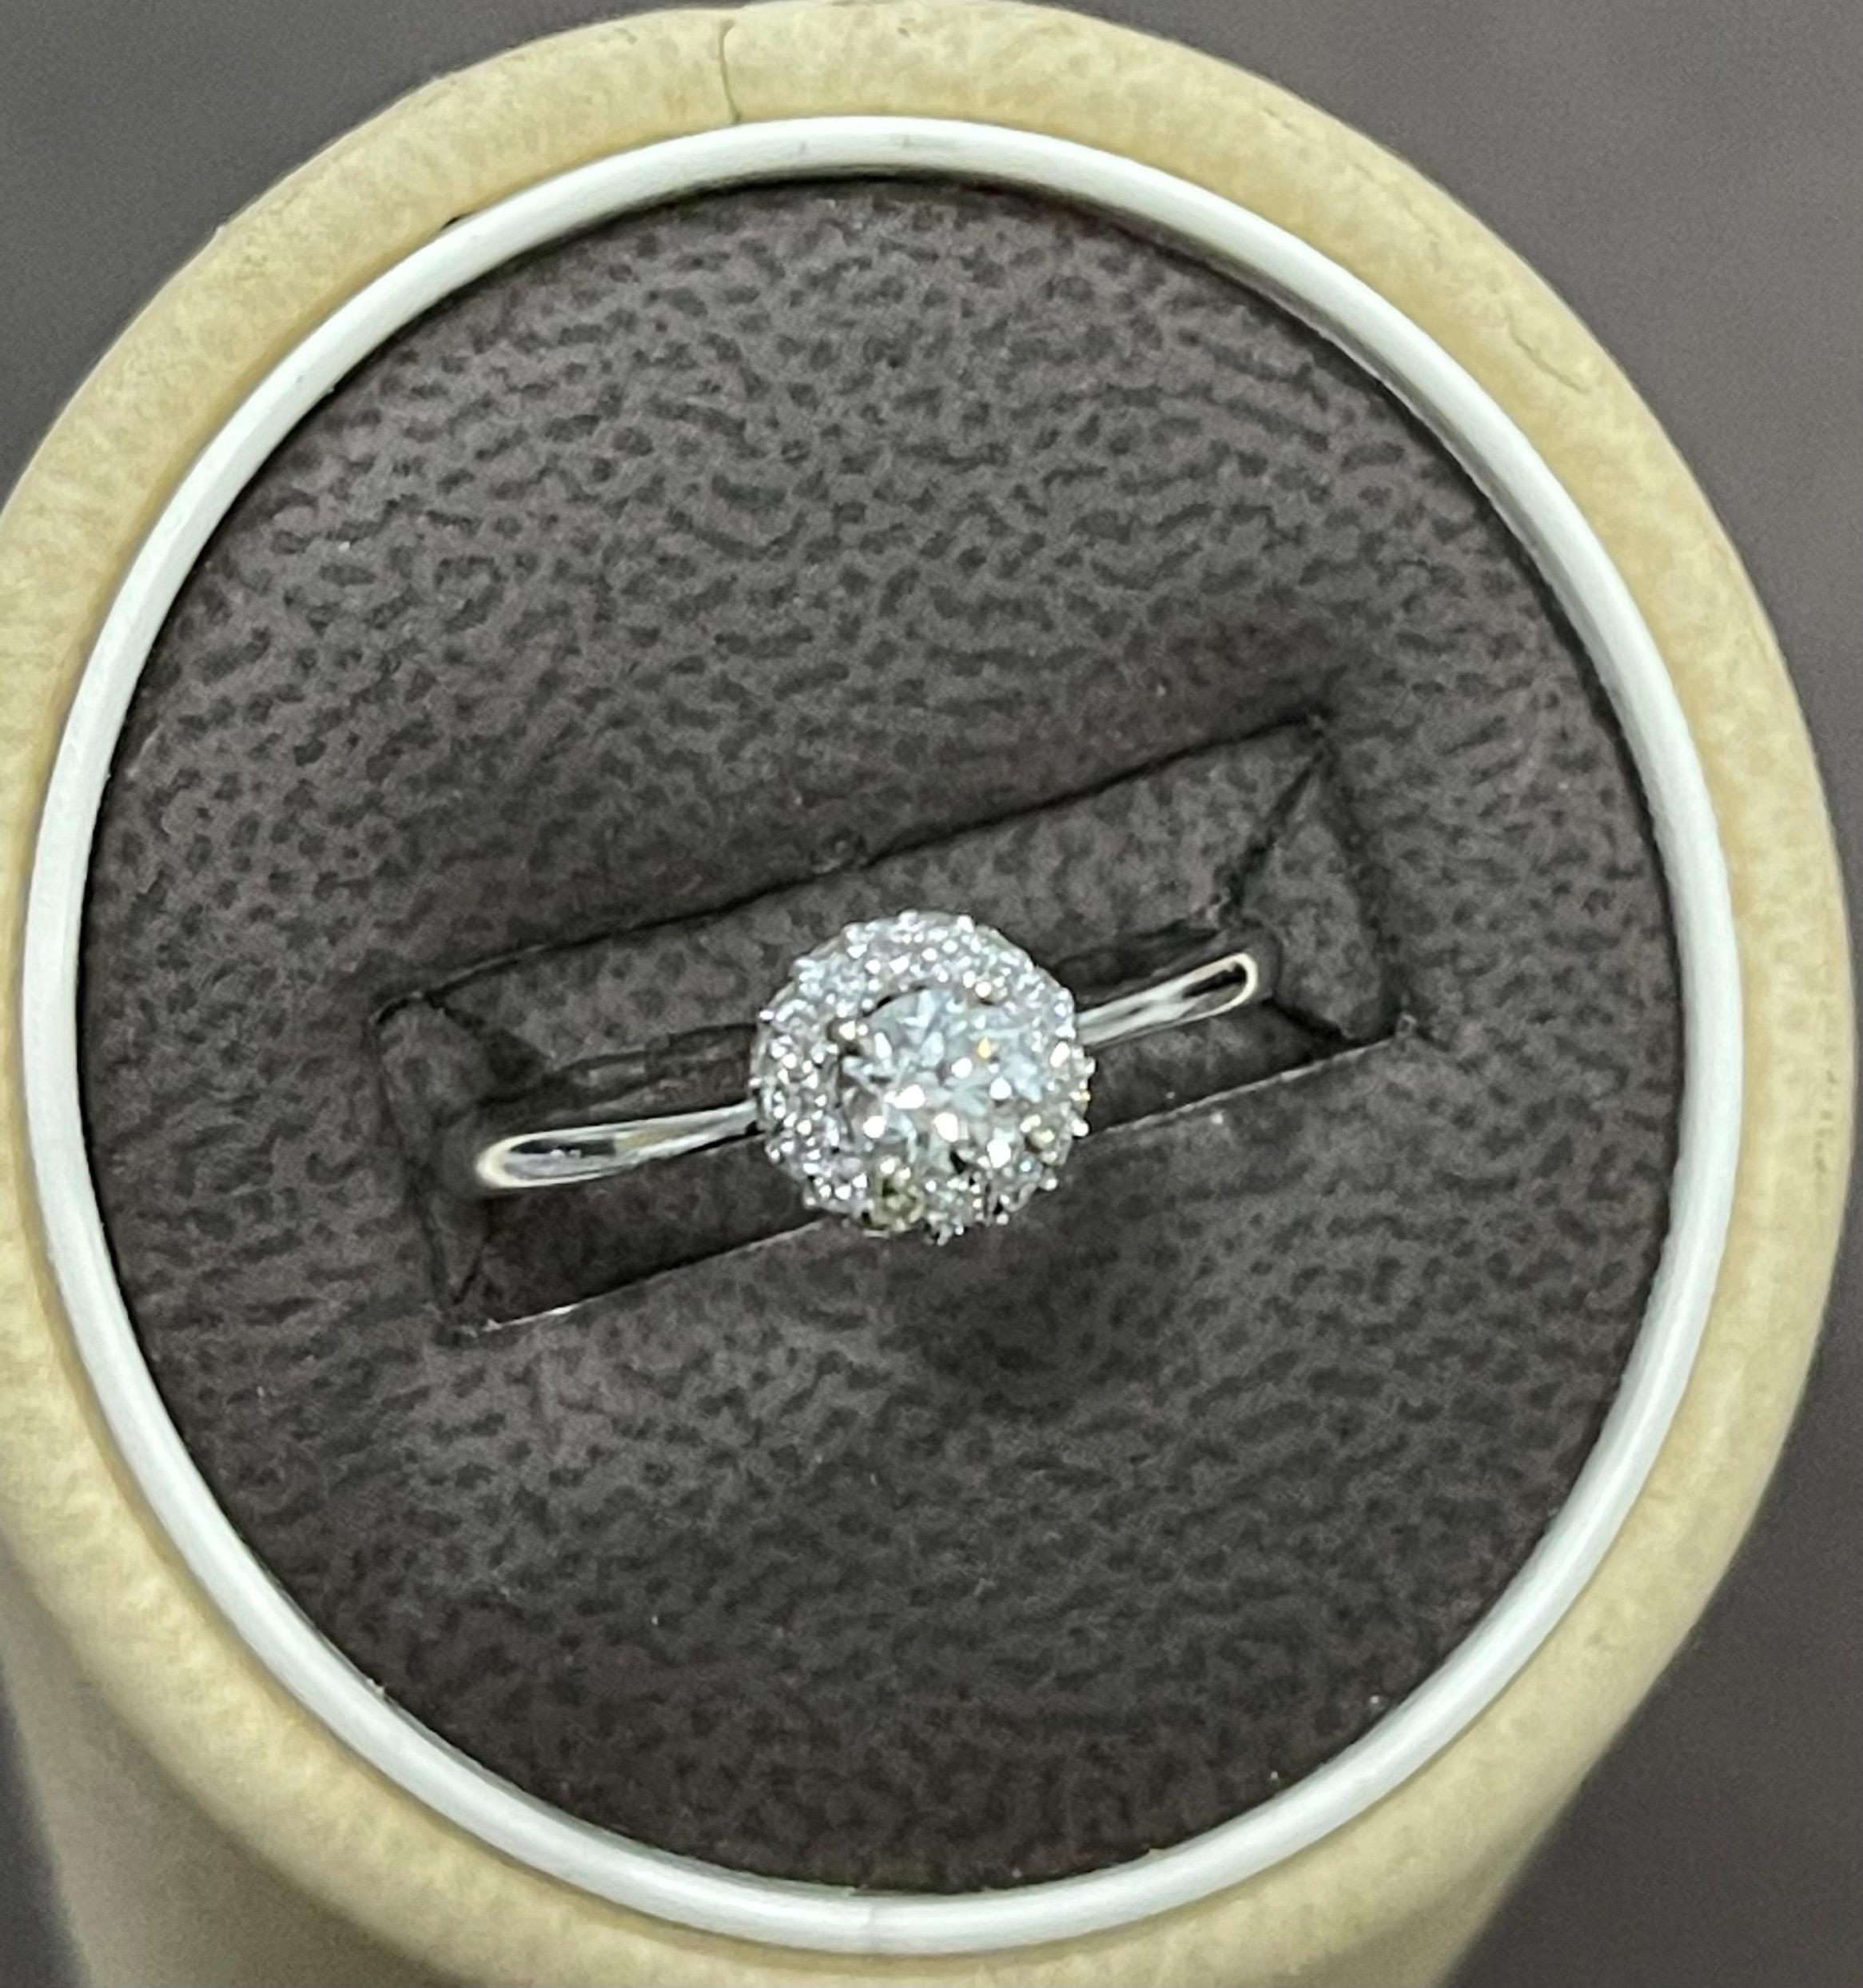  Diamond 0.5 Carat Traditional Ring/Band 14 Karat White Gold, Halo Ring
one 25 pointer  Brilliant cut round diamonds  surrounded by small diamond halo ring around the center diamond.
Center stone is approximately 25 pointer while the side diamonds